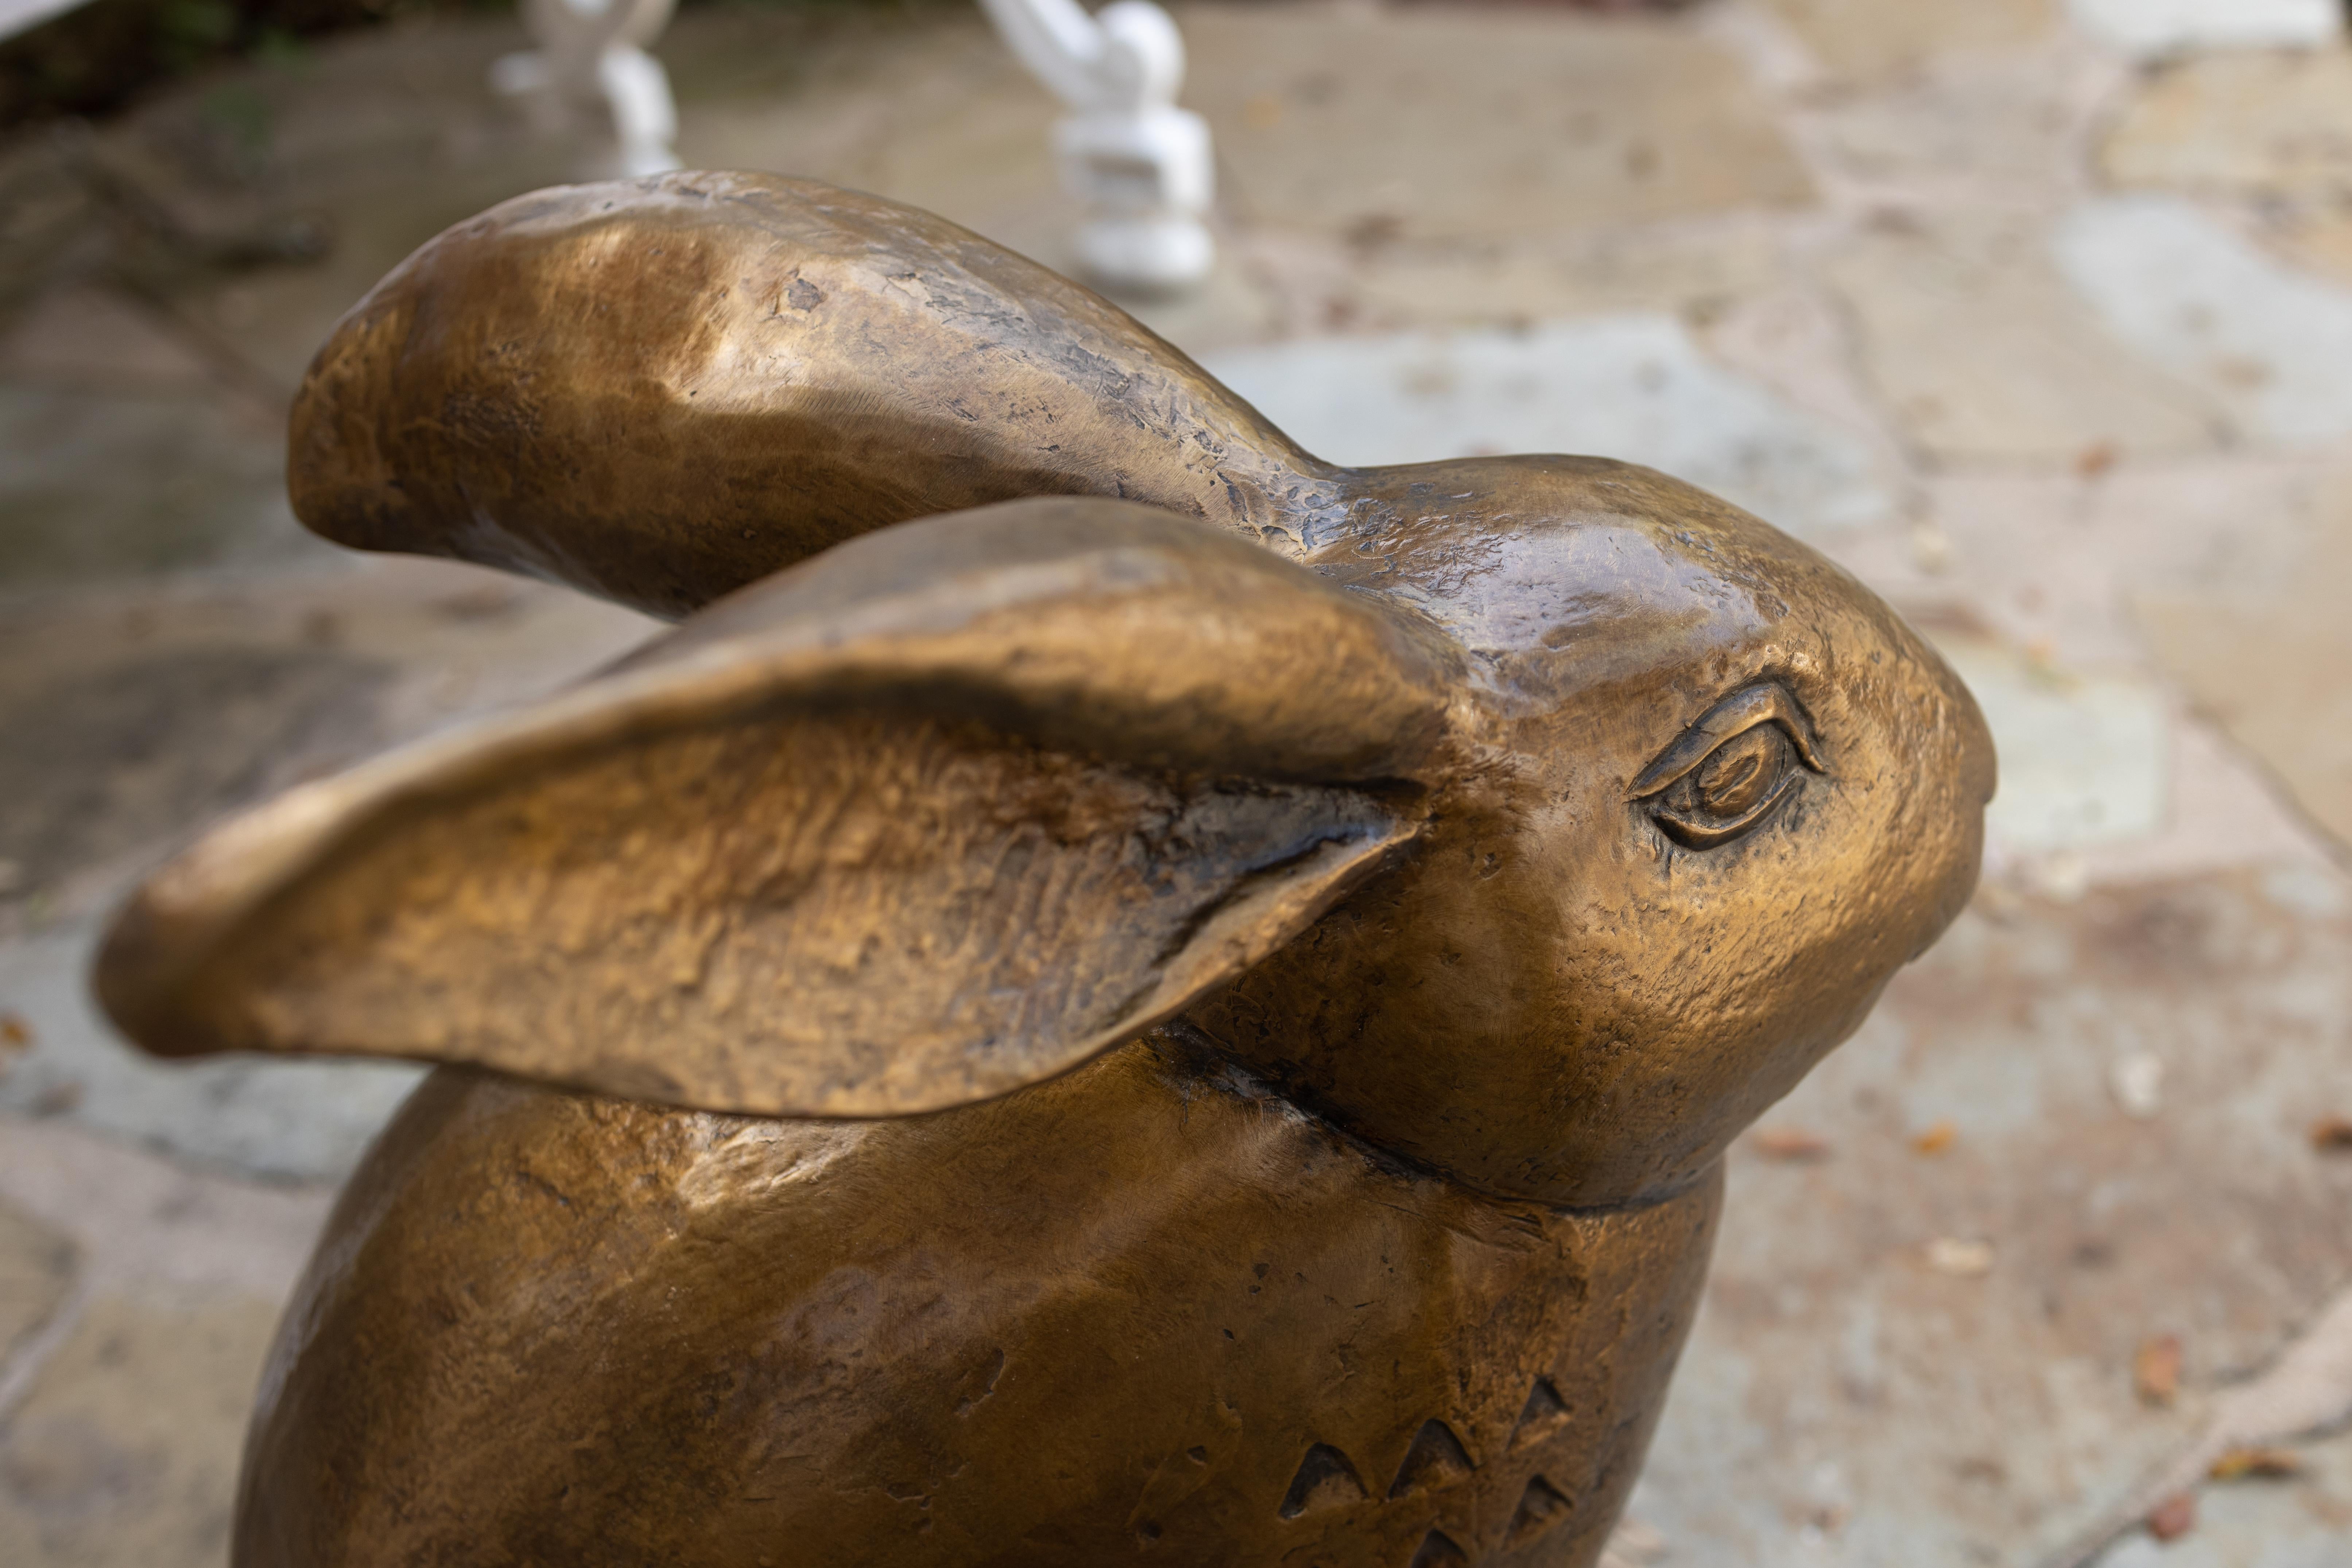 This exquisite bronze sculpture of a rabbit, created by renowned sculptor Paula Zima, stands at 21 x 13 x 20 inches. Its unique design features ornamental triangle indentations on both sides, adding a distinctive texture to the piece. This artful